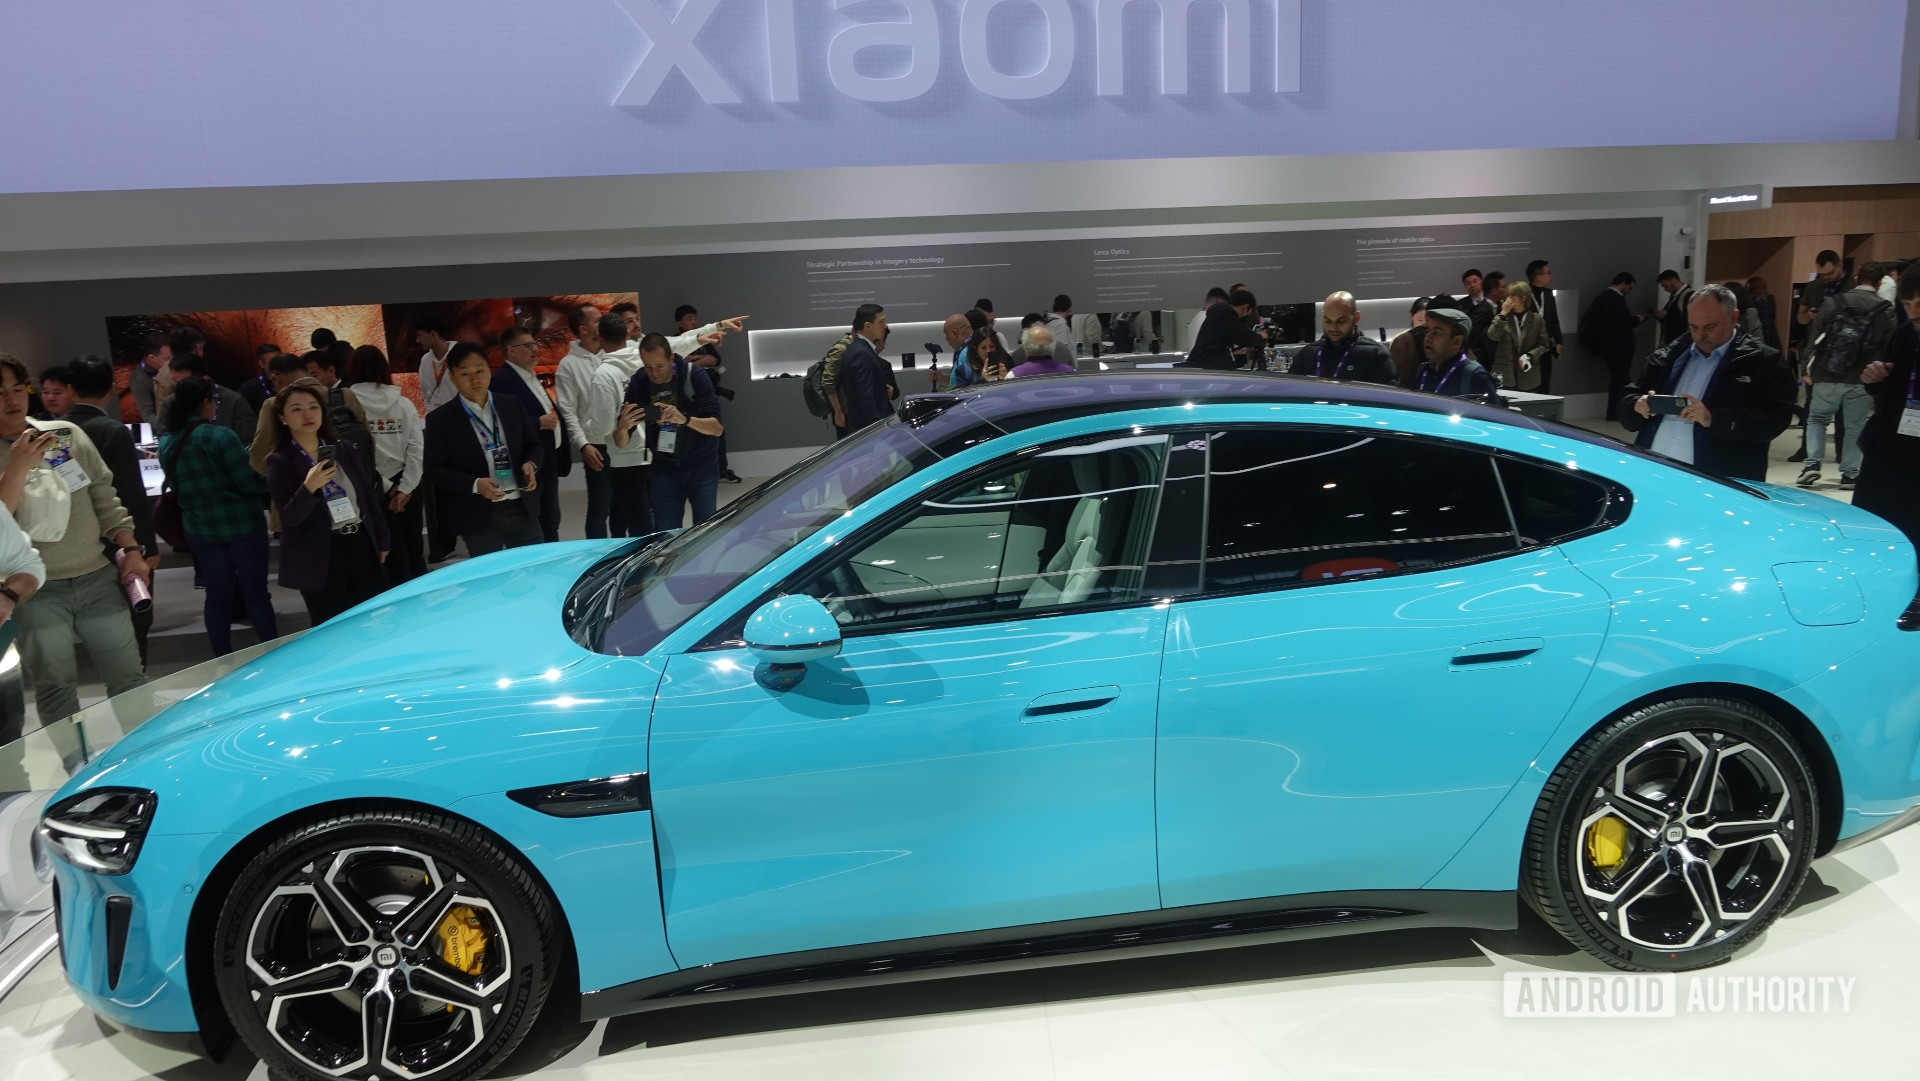 Xiaomi enters Chinese EV market with SU7, offering longer range, lower costs